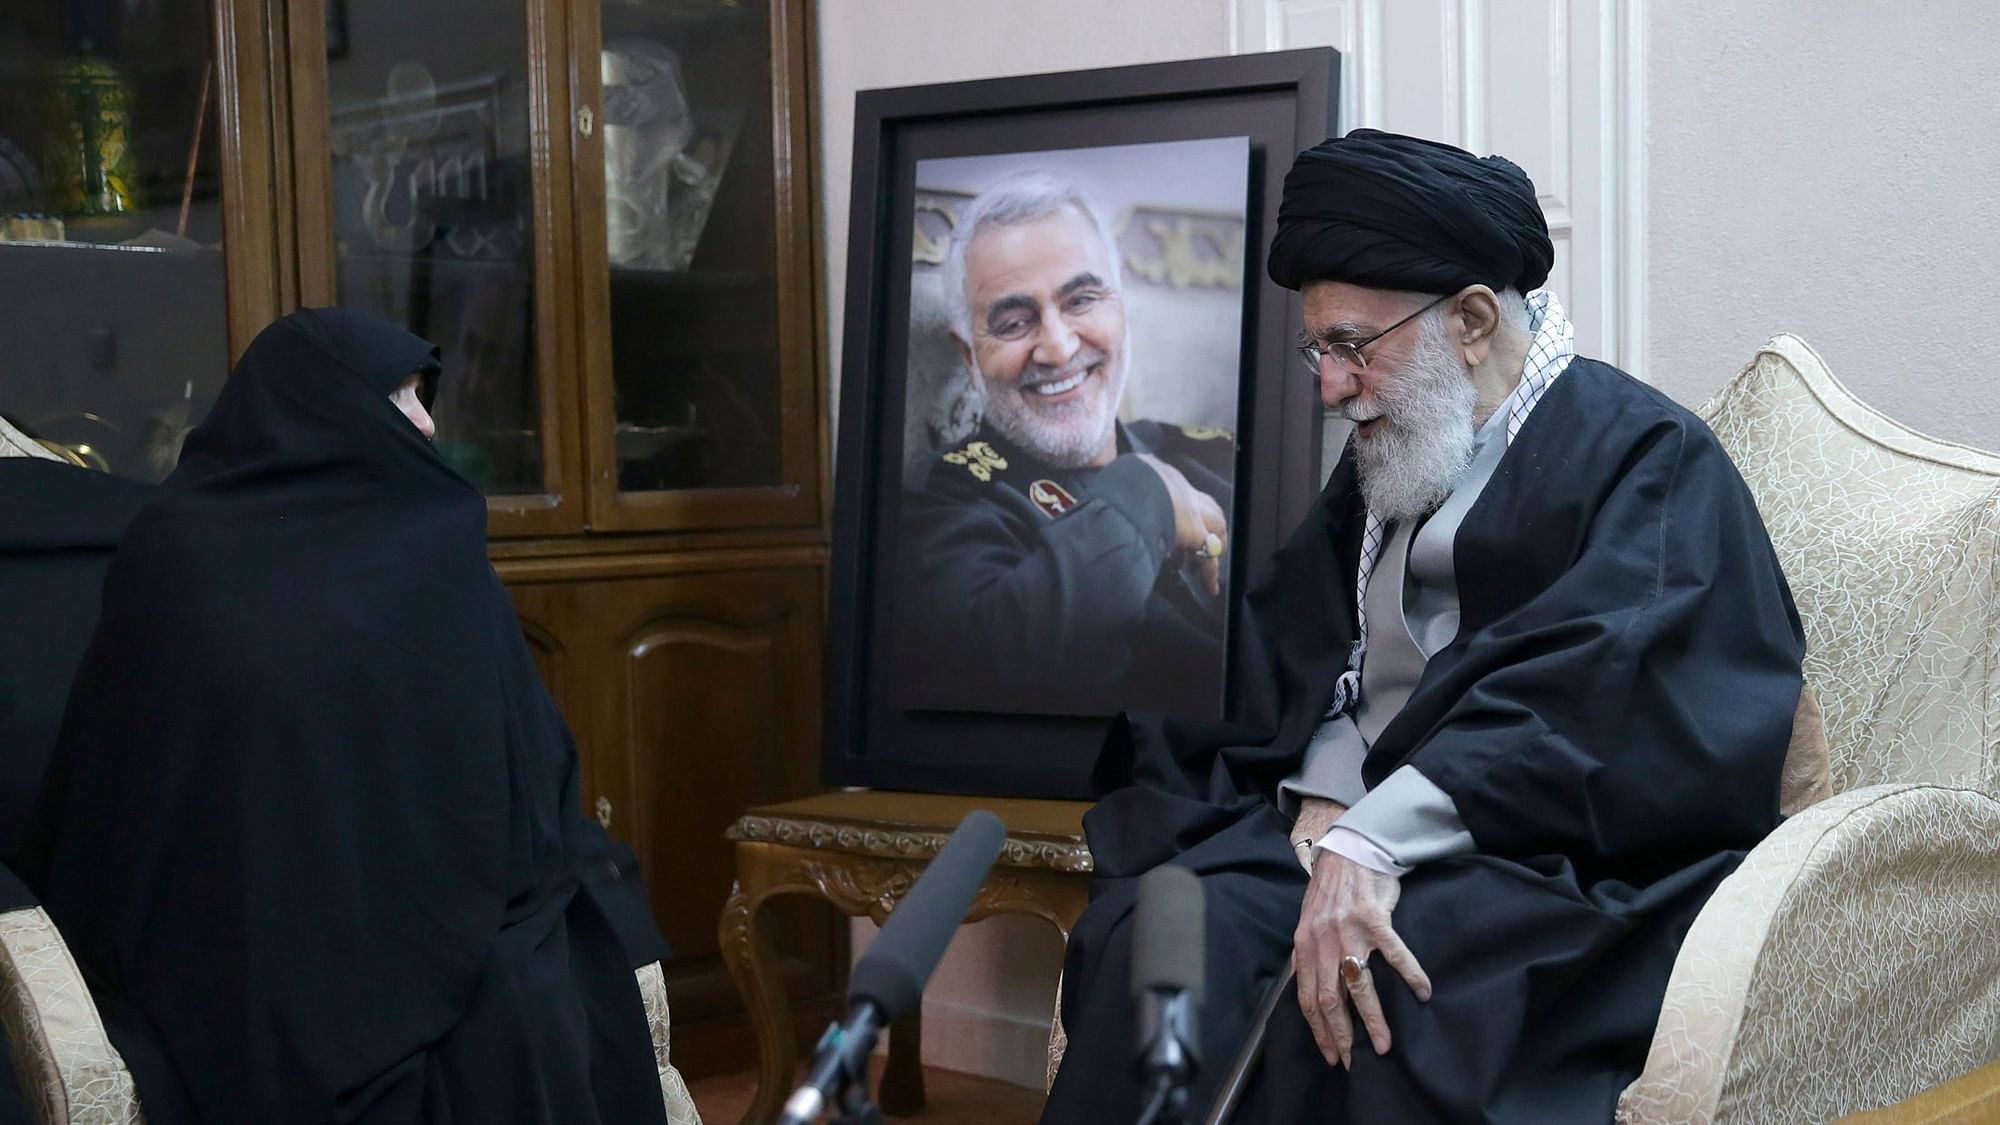 Iran Supreme Leader Ayatollah Ali Khamenei, right, meets family of Iranian Revolutionary Guard Gen. Qassem Soleimani, who was killed in the US airstrike in Iraq. Image used for representation.